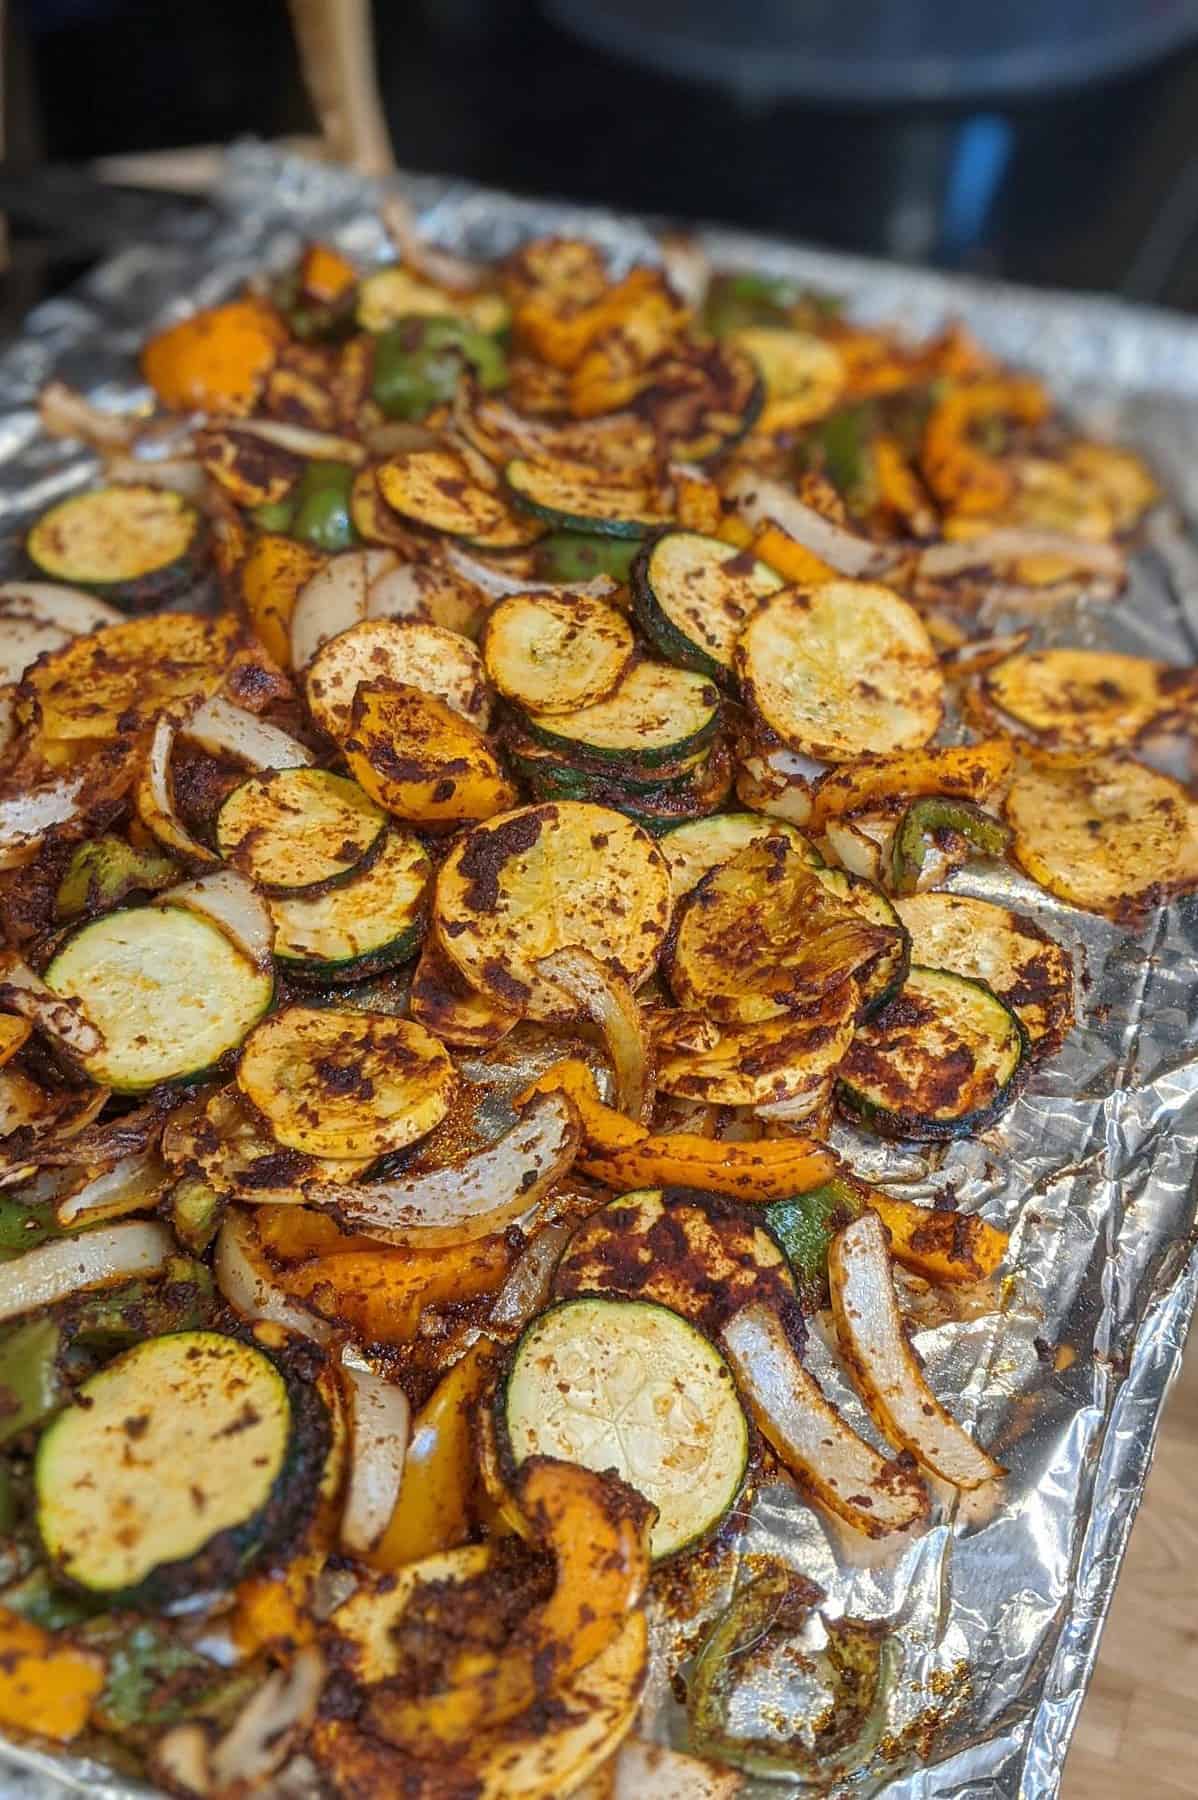  Perfectly charred and packed with flavor, these veggies are the ultimate summer side dish.